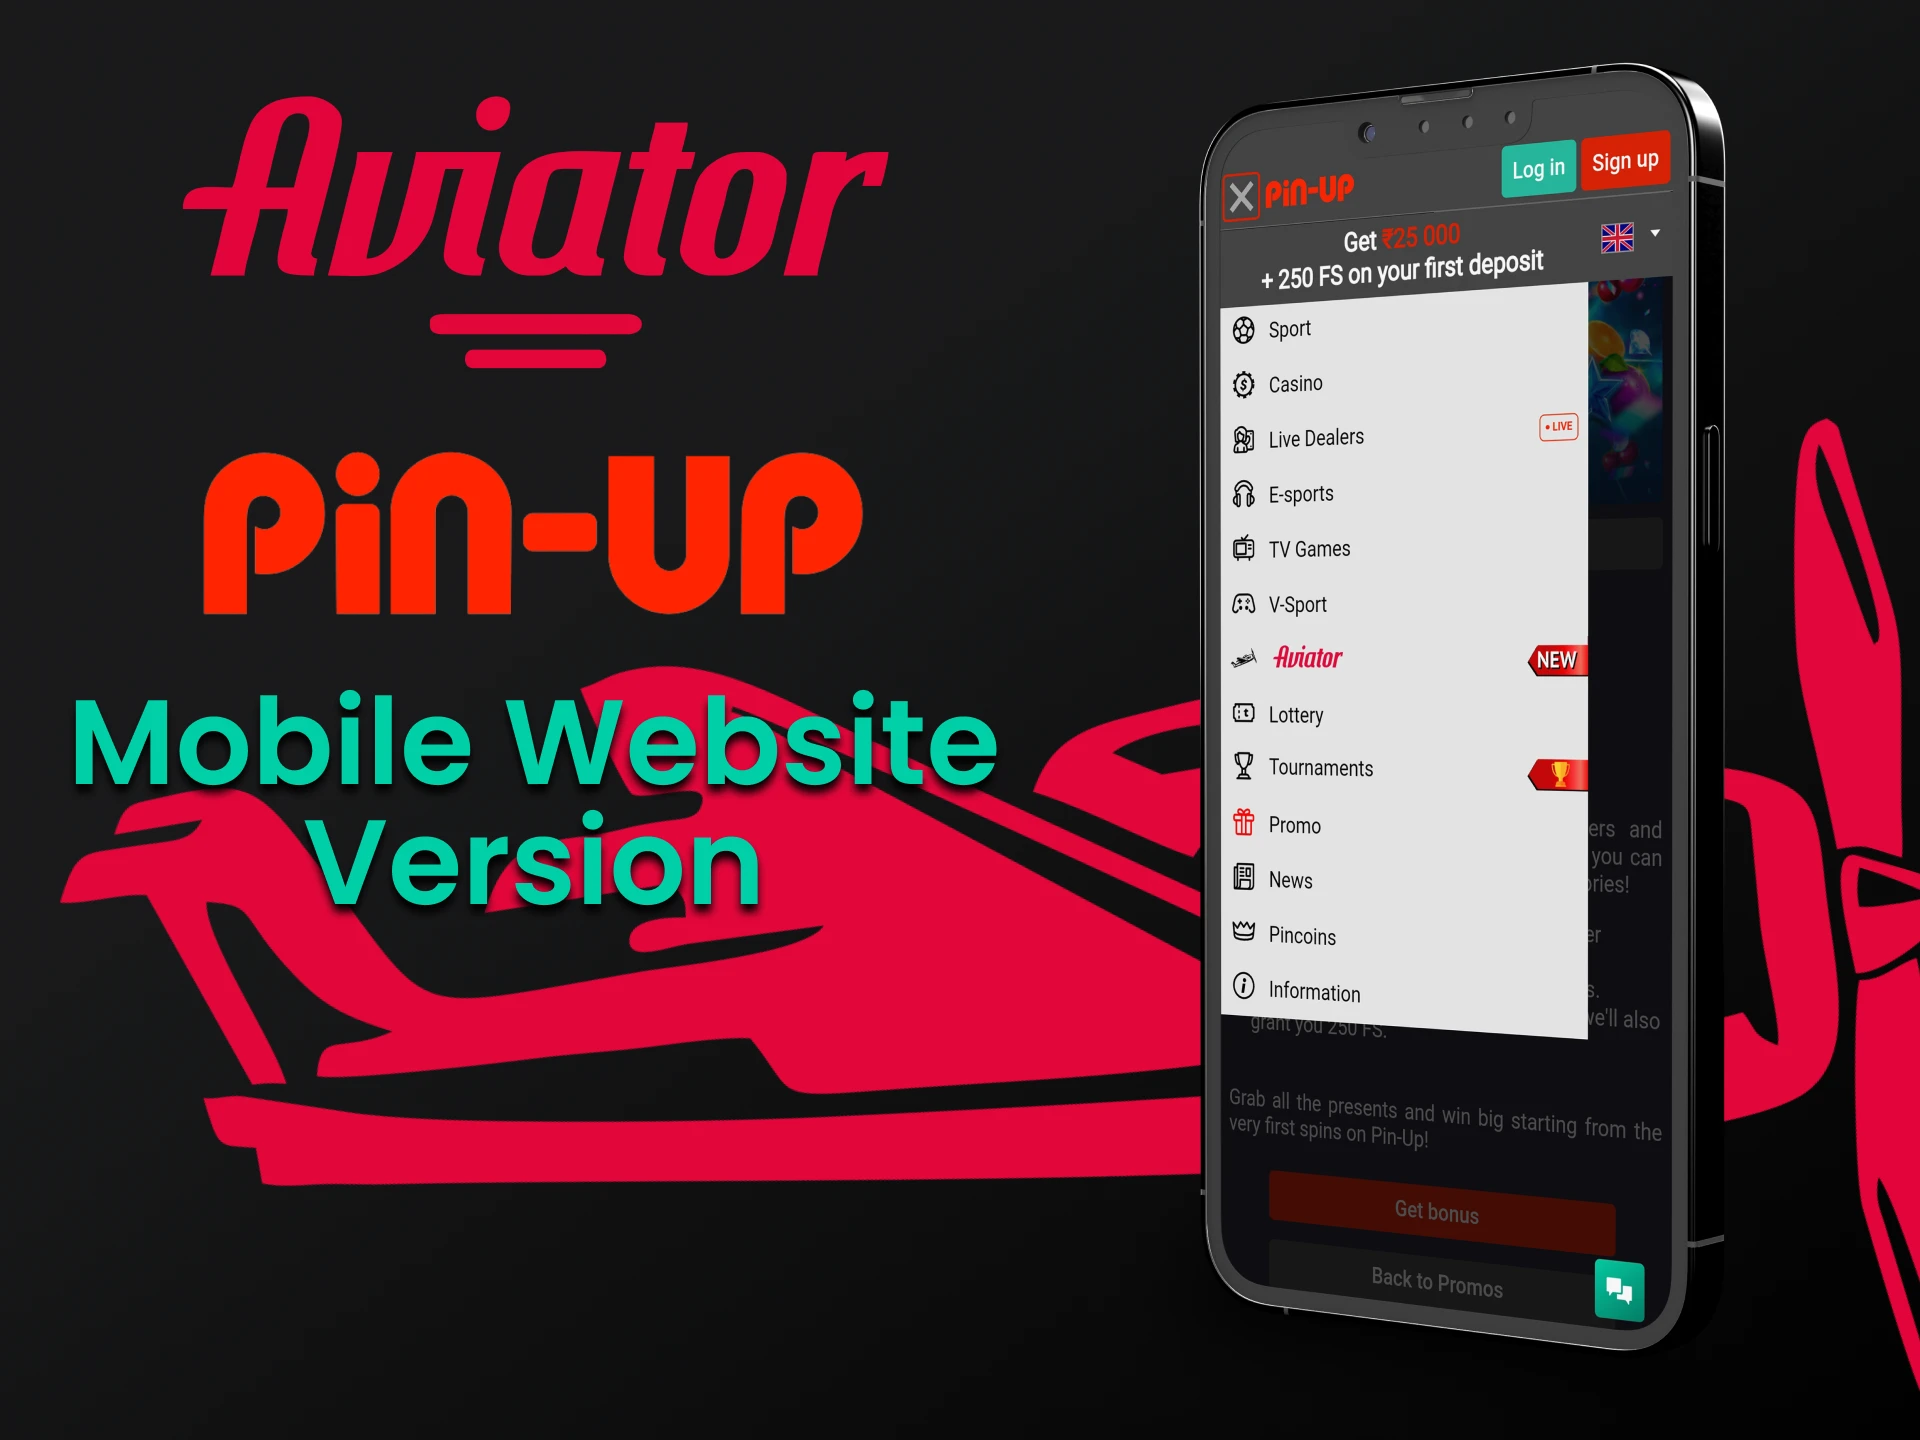 You can use your smartphone to play Aviator at Pin Up.